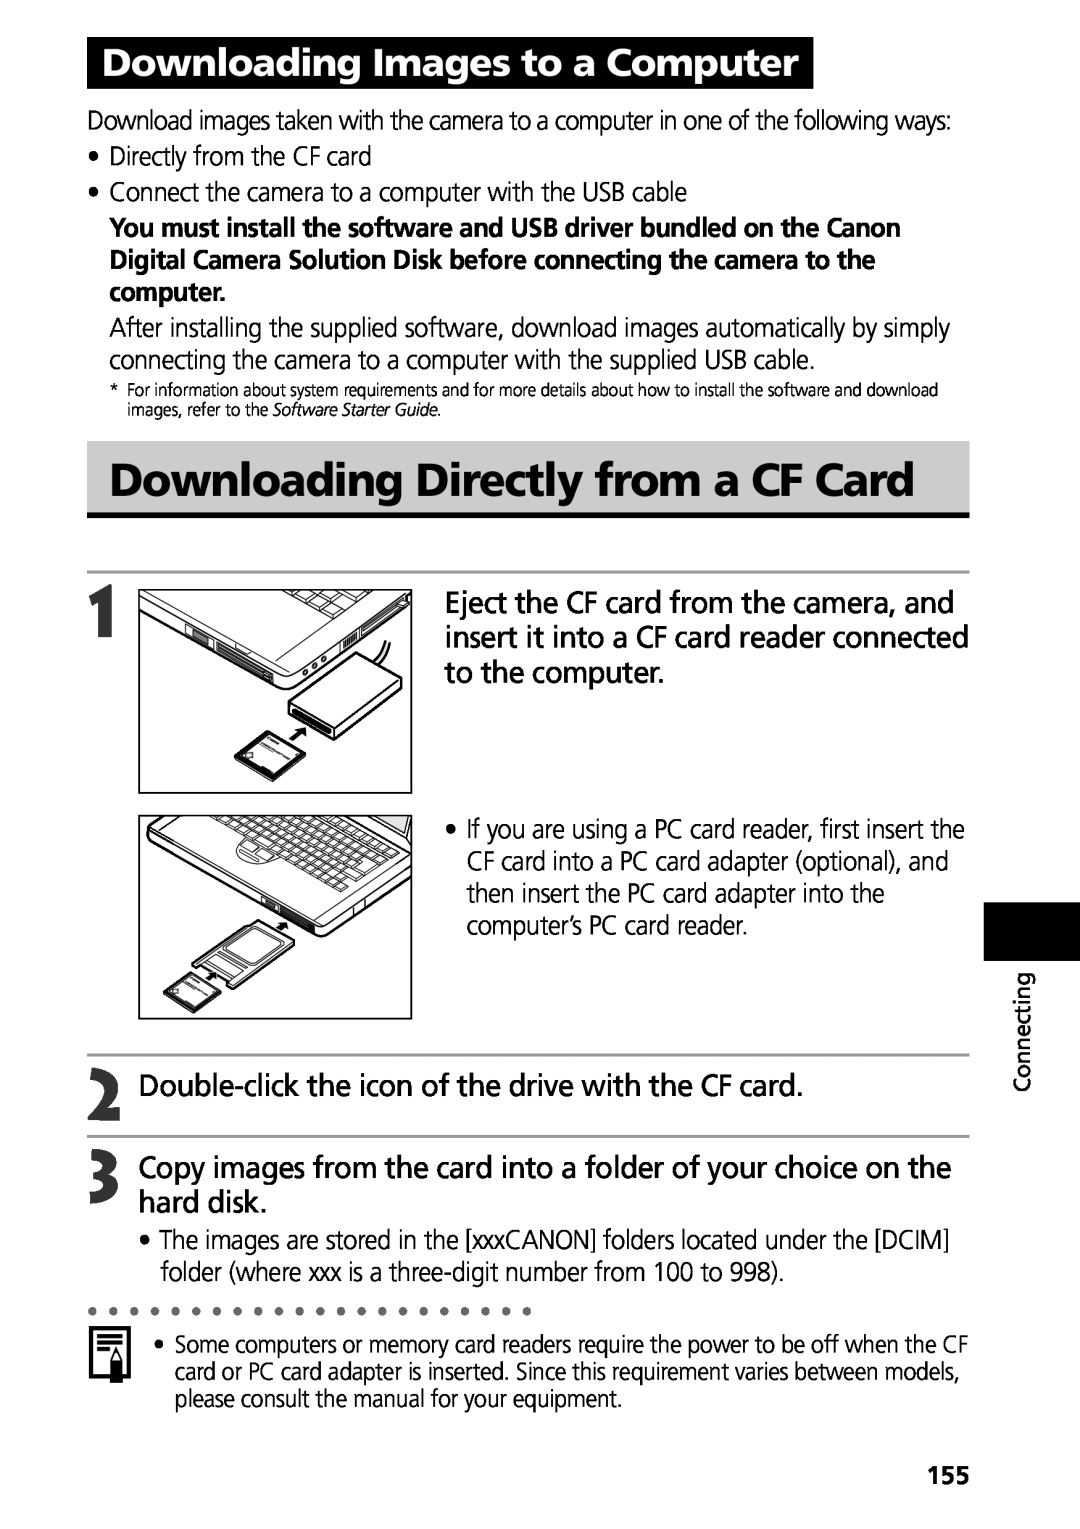 Canon G3 manual Downloading Directly from a CF Card, Downloading Images to a Computer 